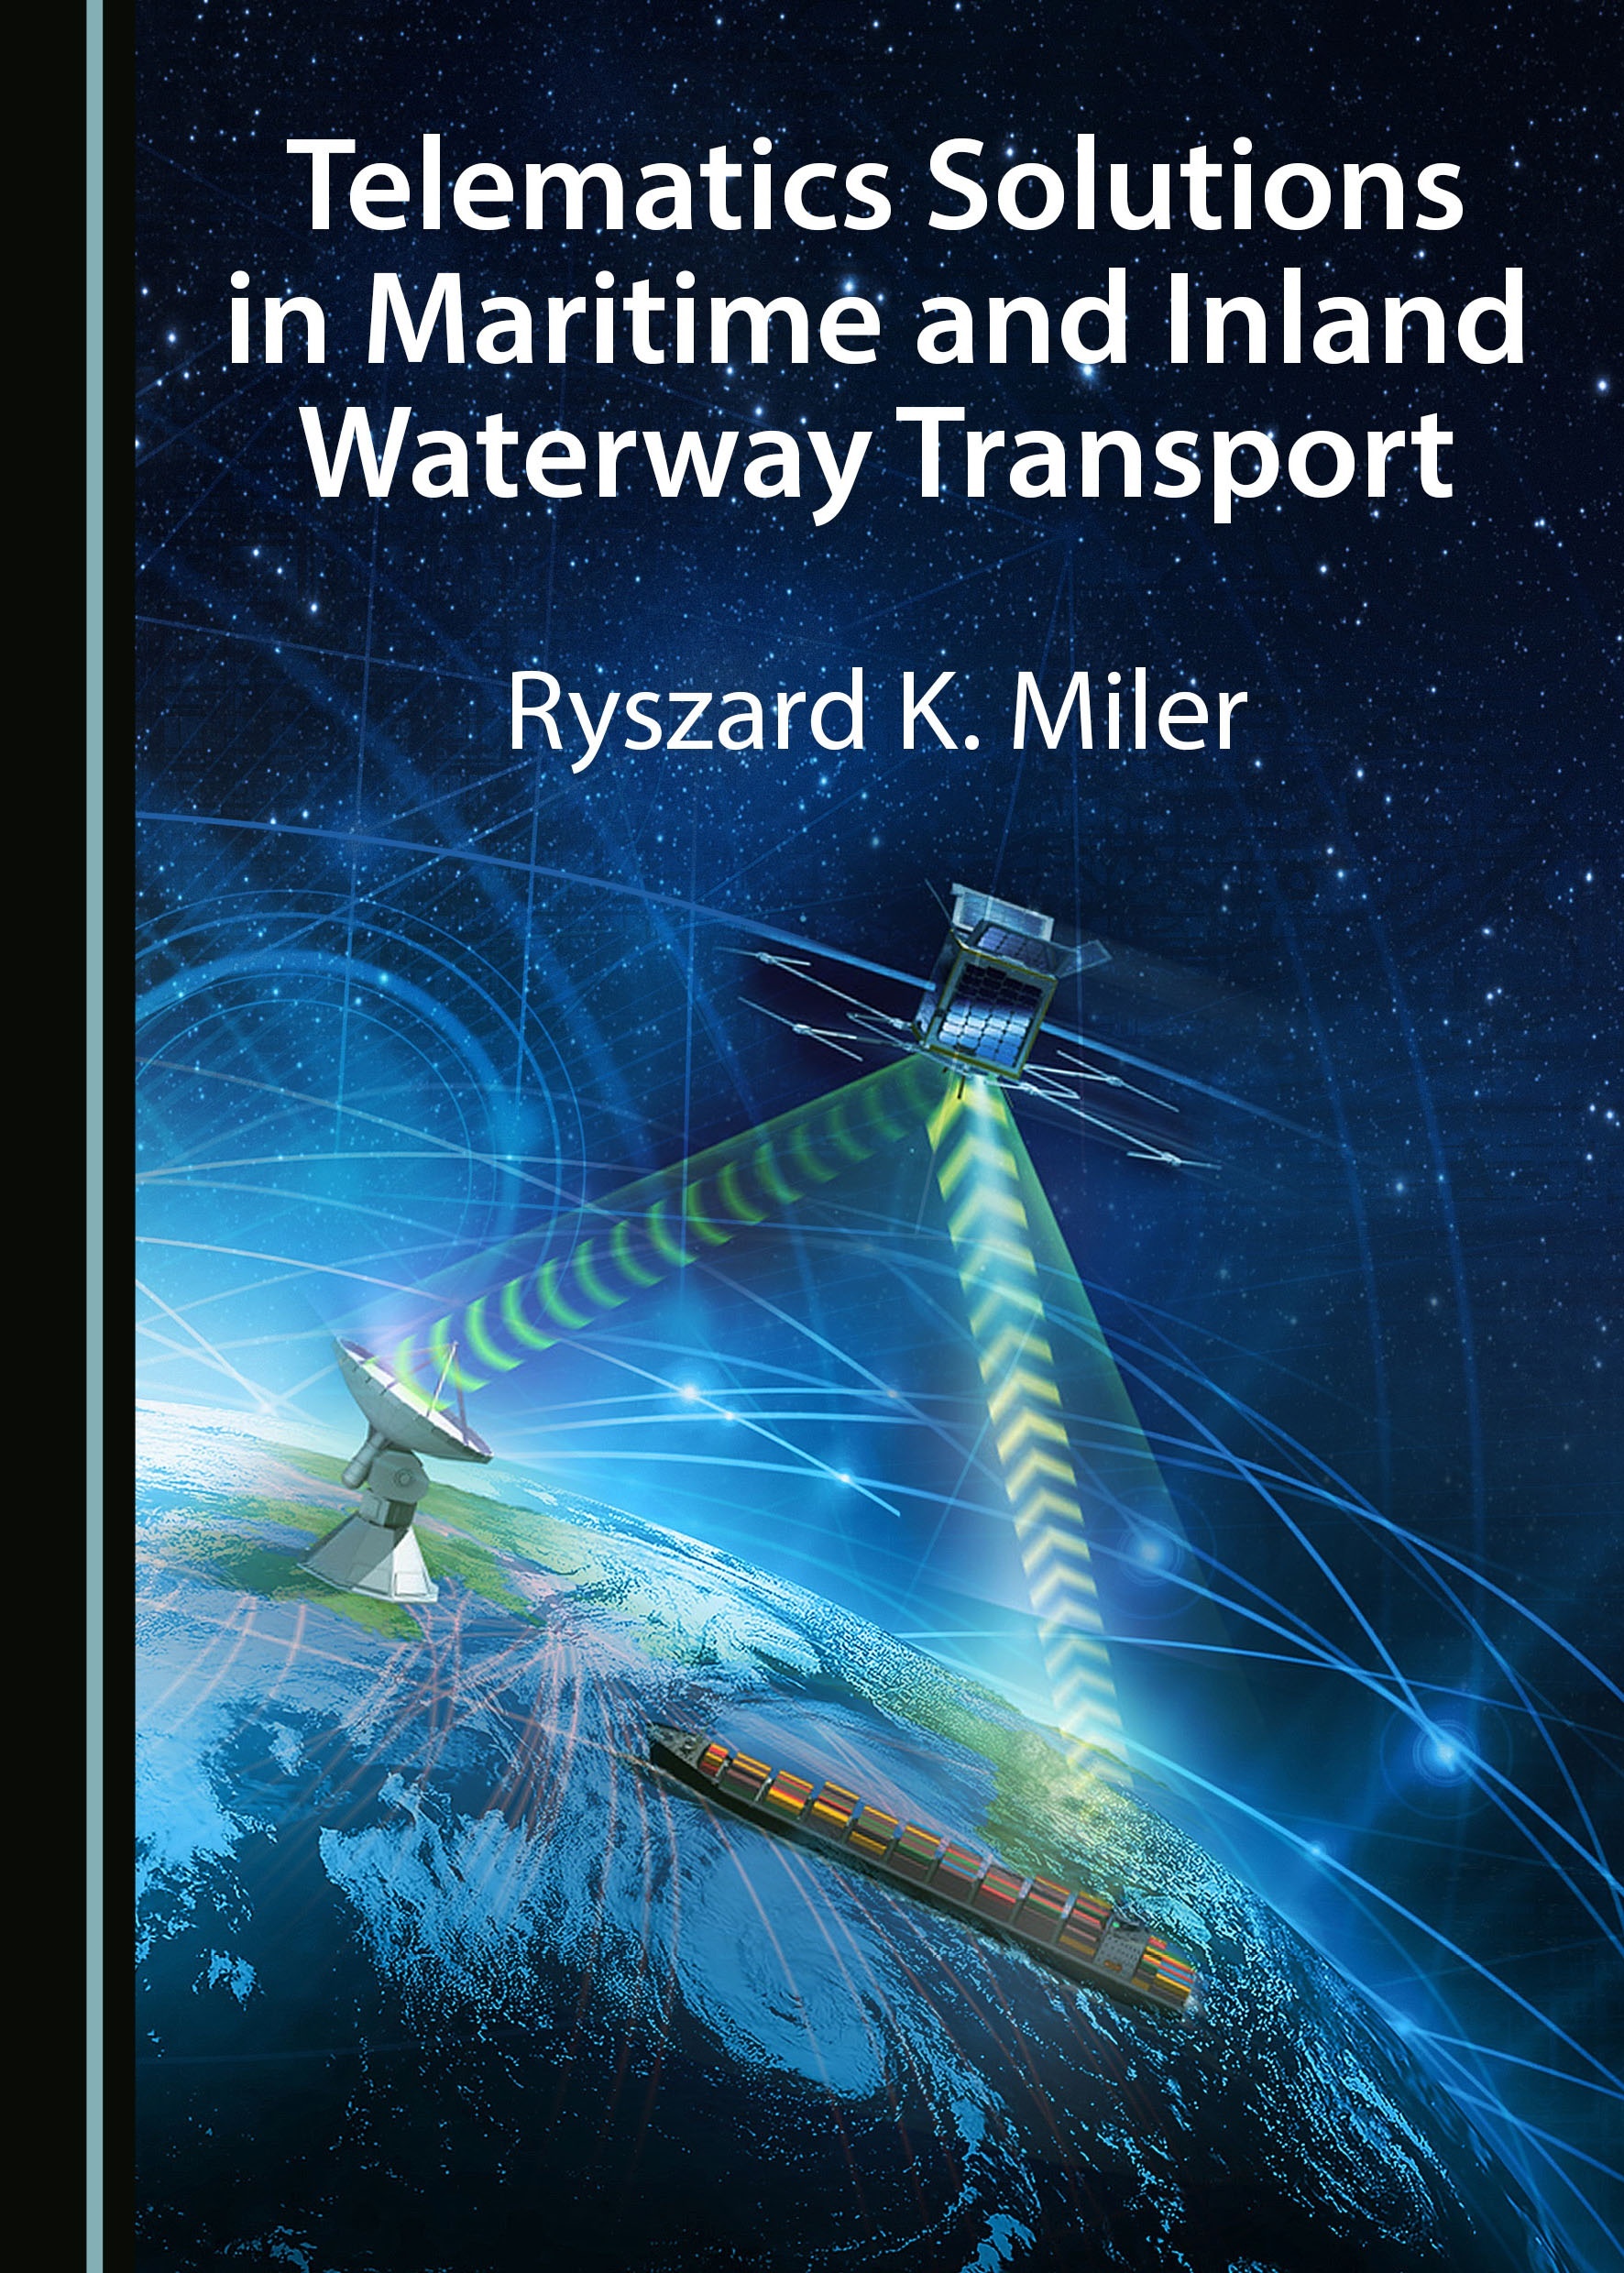 Telematics Solutions in Maritime and Inland Waterwat Transport